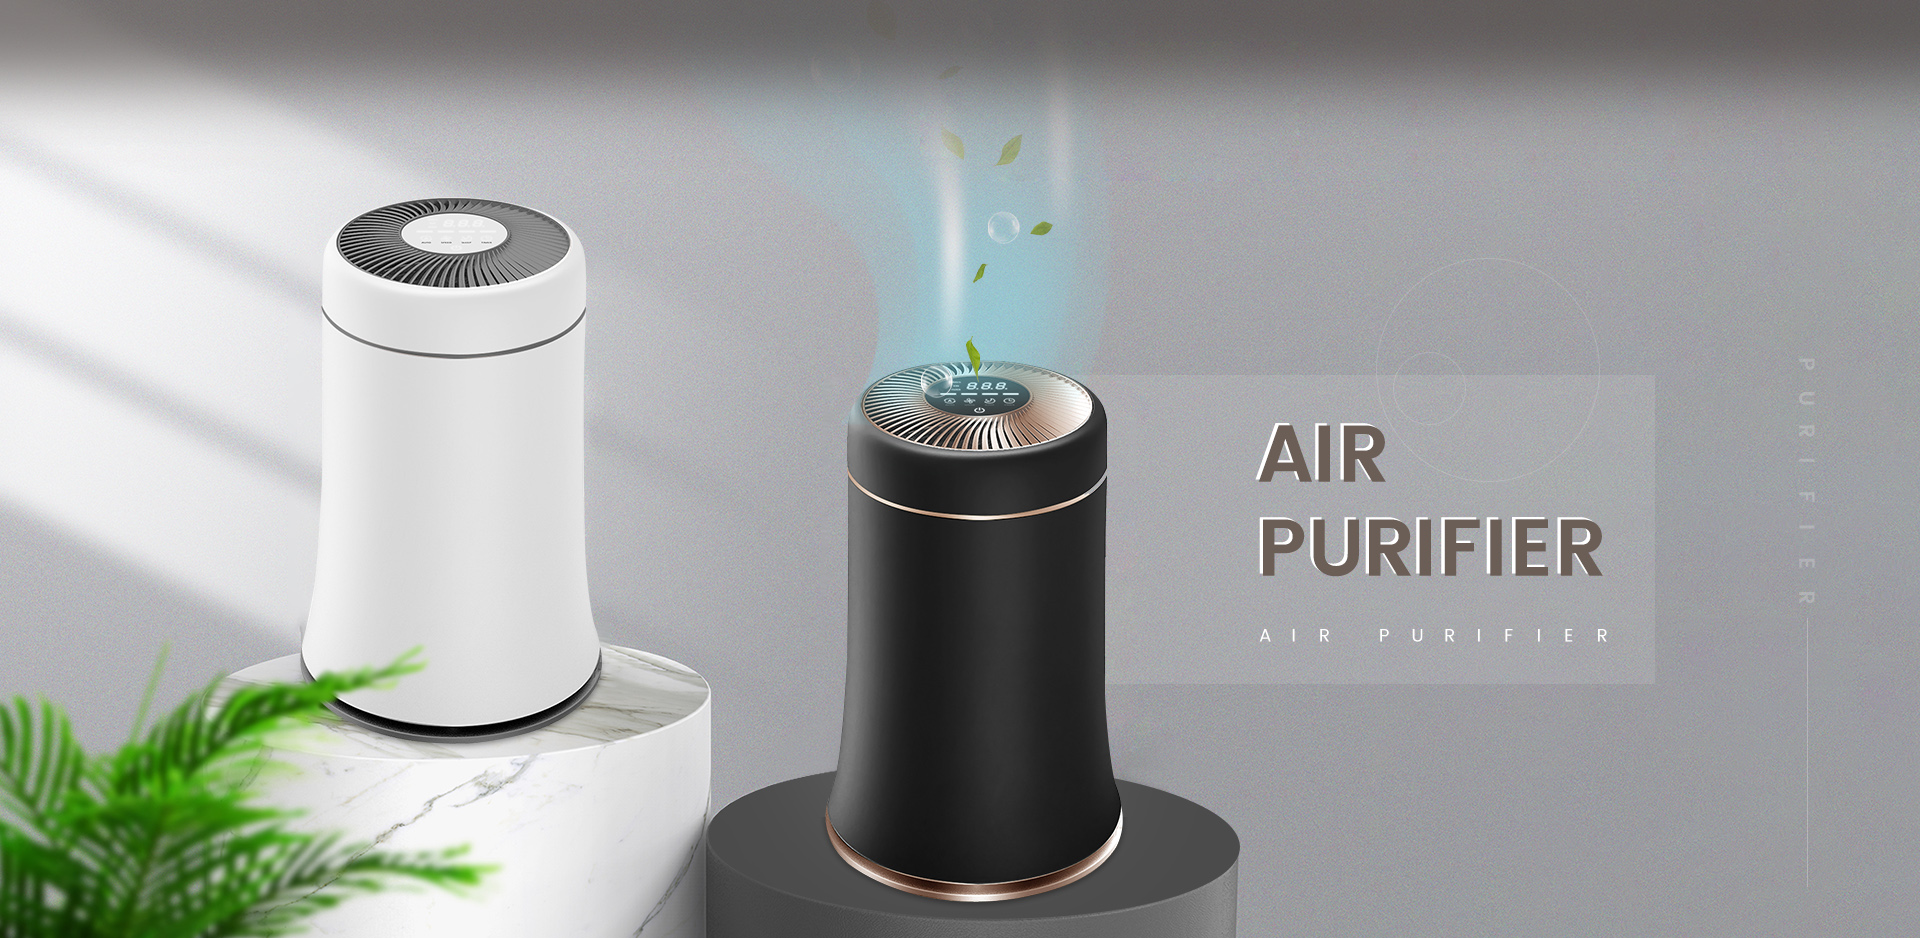 Why many people recommend you to buy an air purifier？